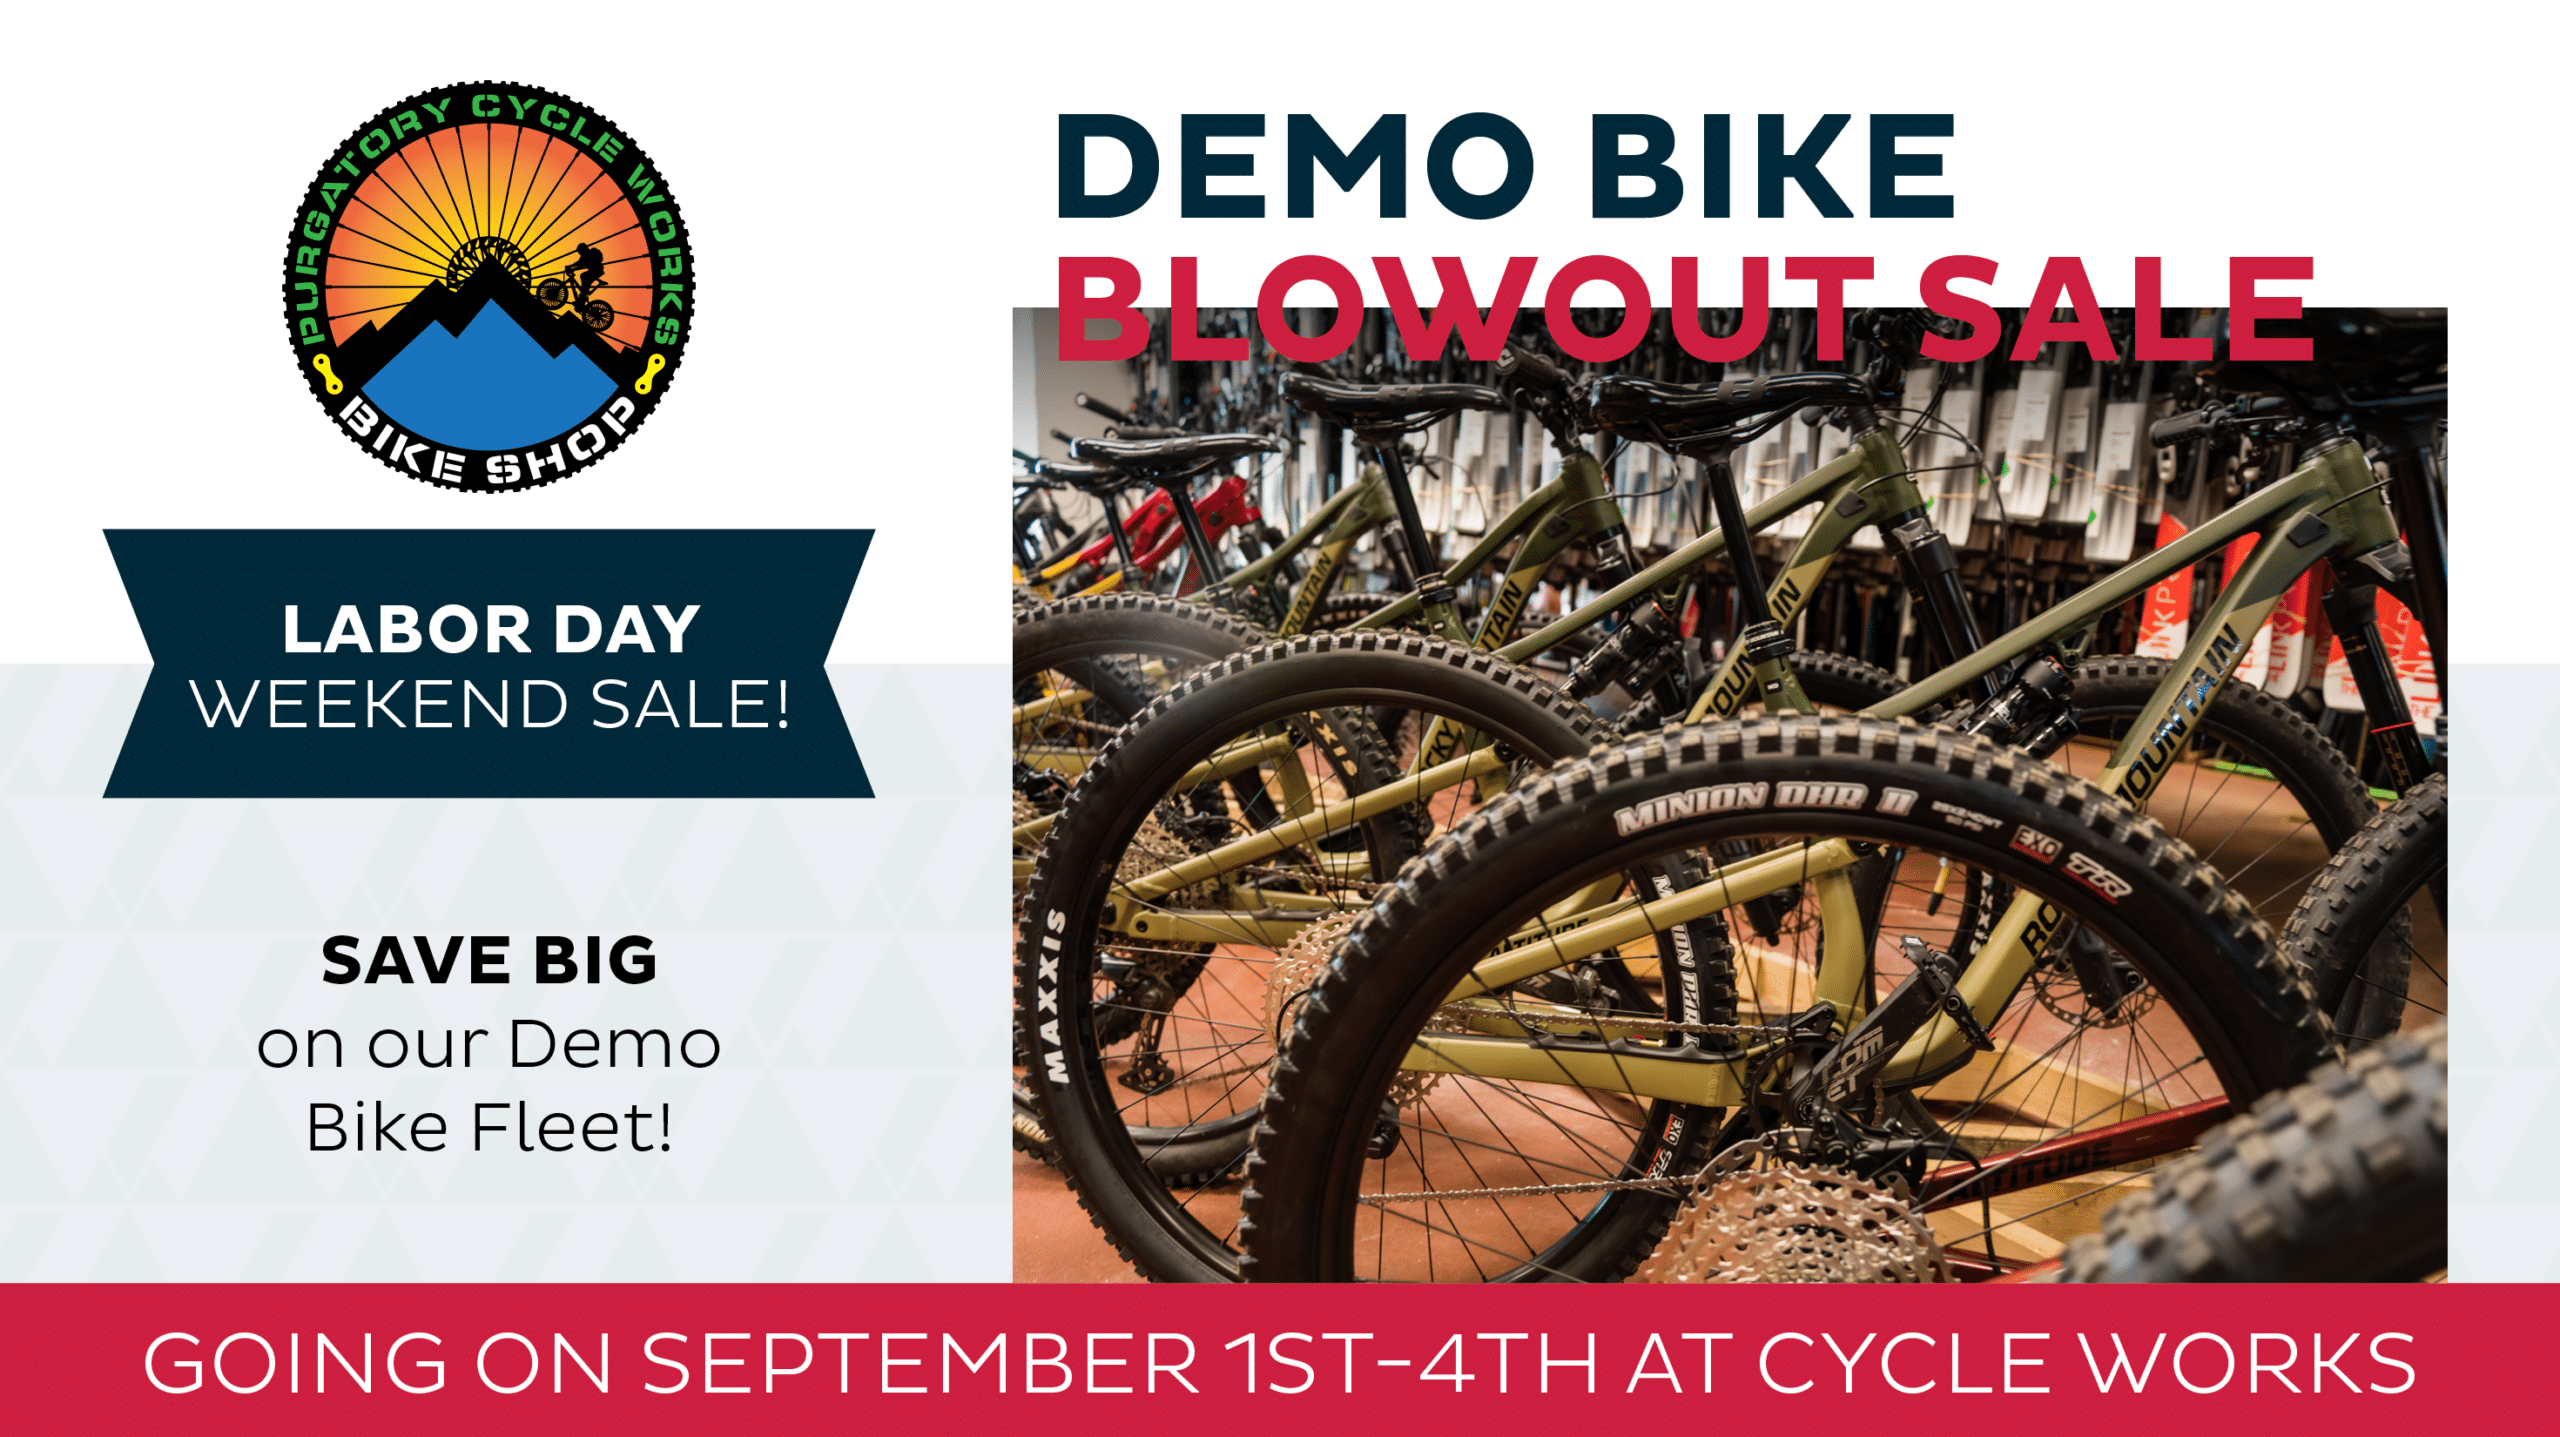 Demo Bike Blowout Sale Labor Day Weekend Sale at Purgatory Cycle Works Bike Shop. Save big on our demo fleet. Going on September 1st- 4th at cycle works.